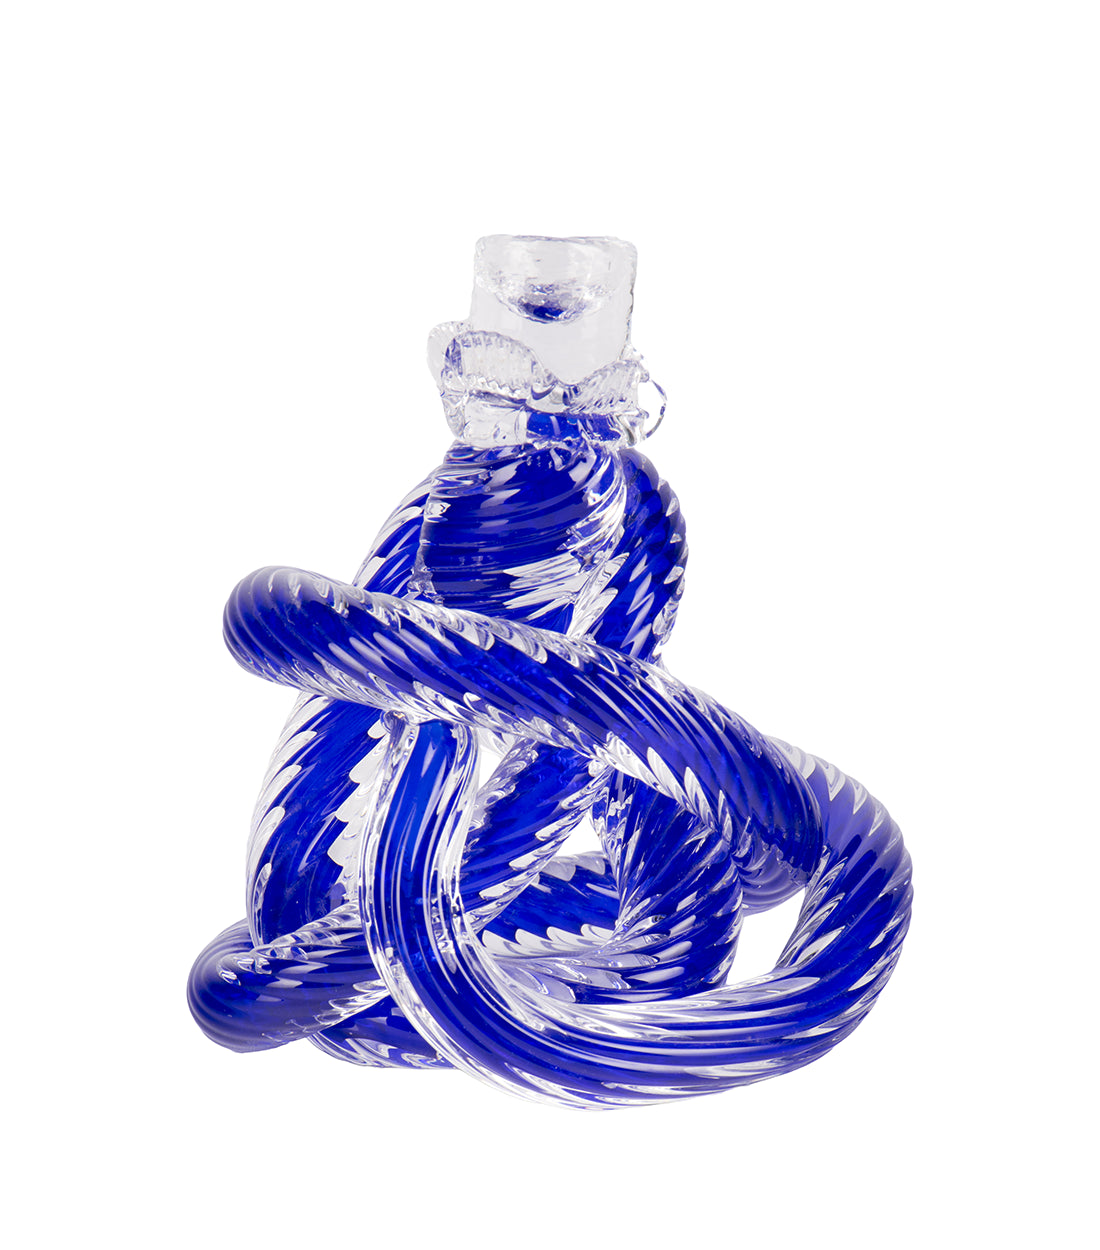 BOREK SIPEK - Blue abstract candle holder - A unique piece of decor that transcends traditional design